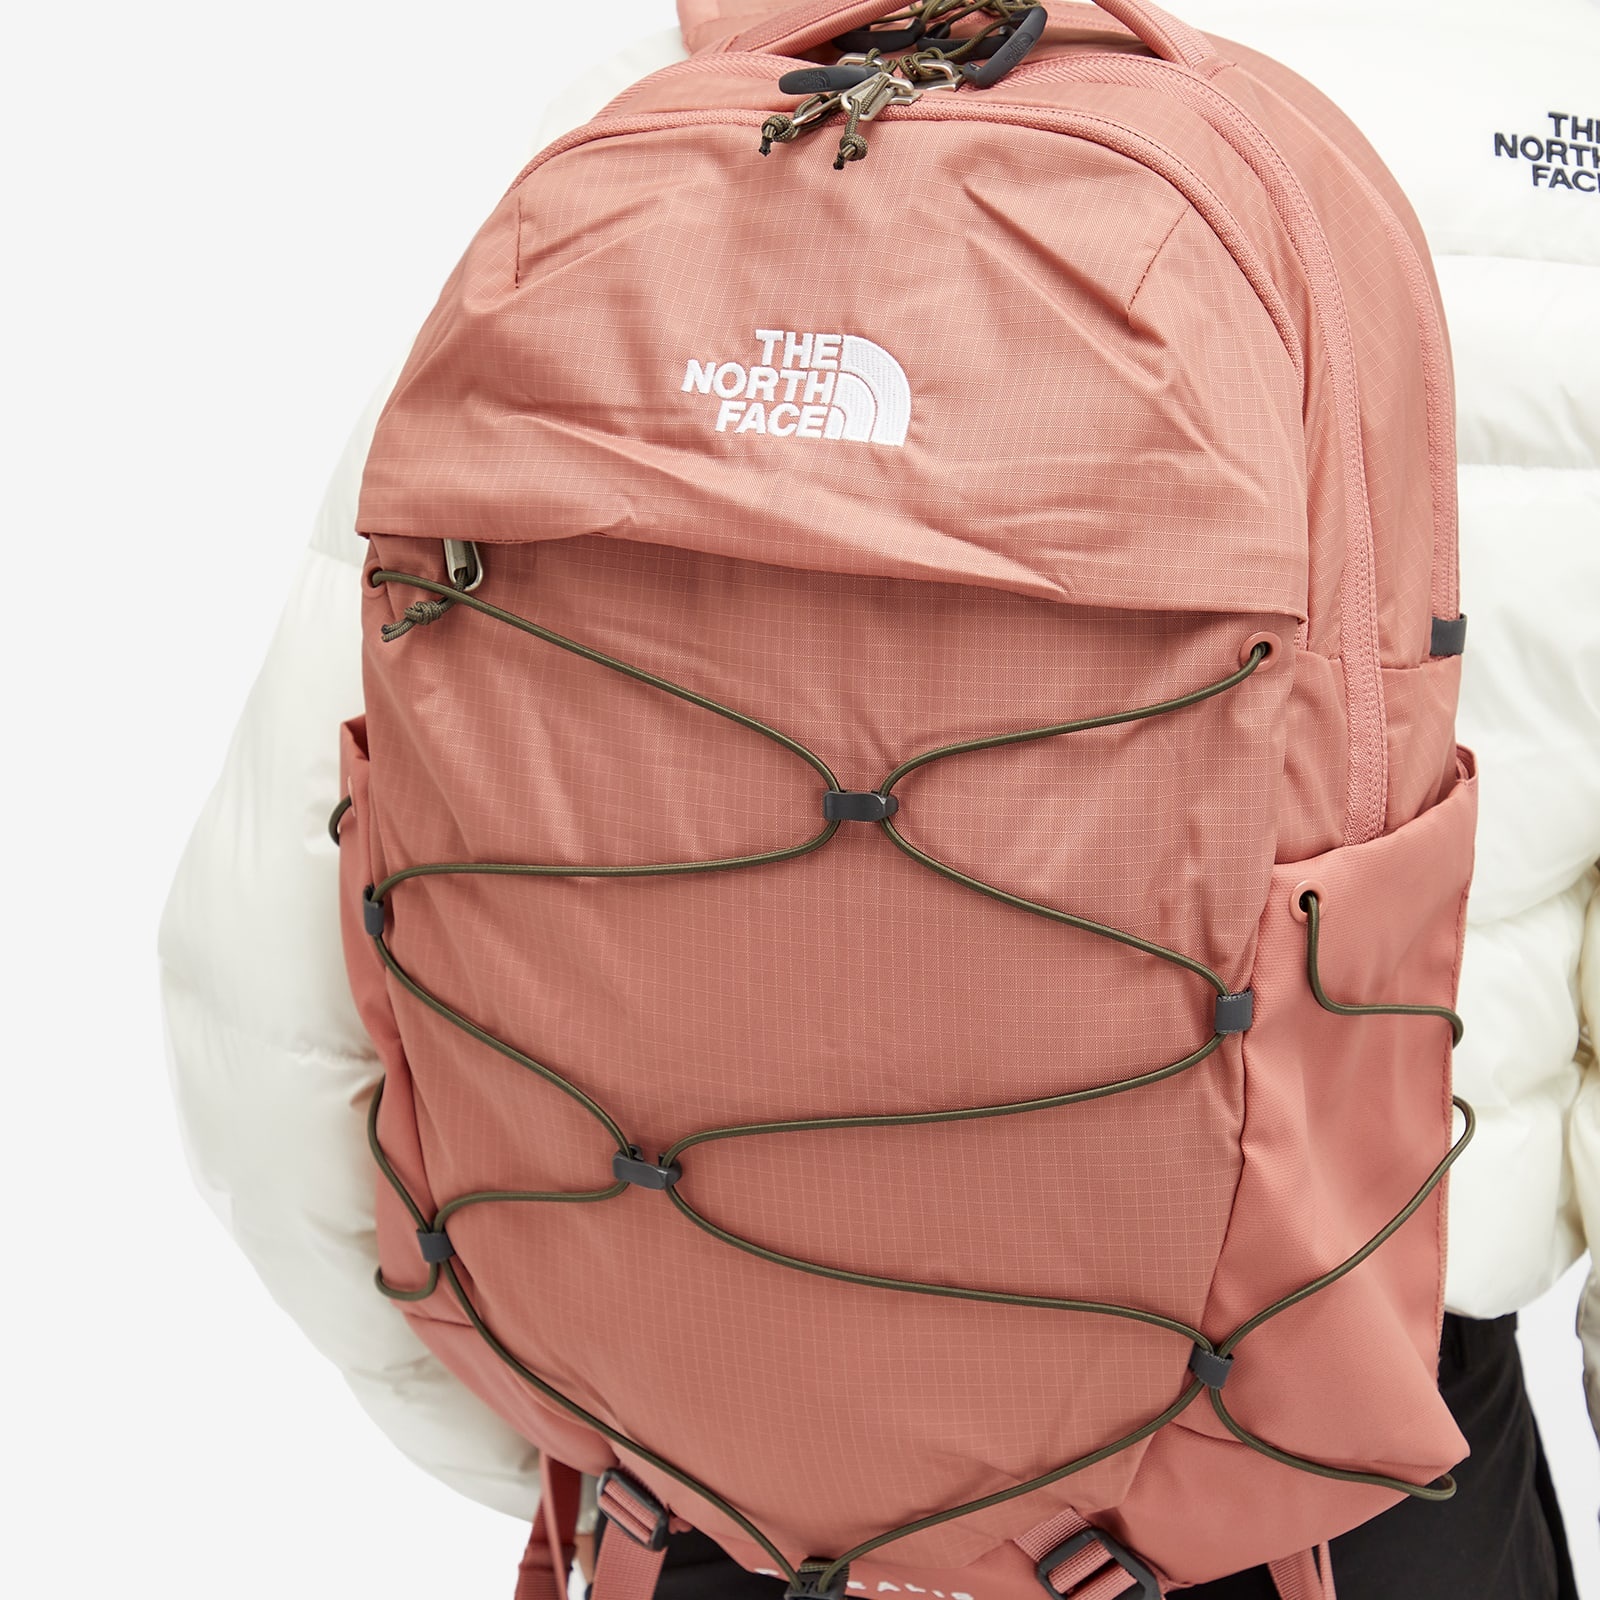 The North Face Borealis Backpack - 2